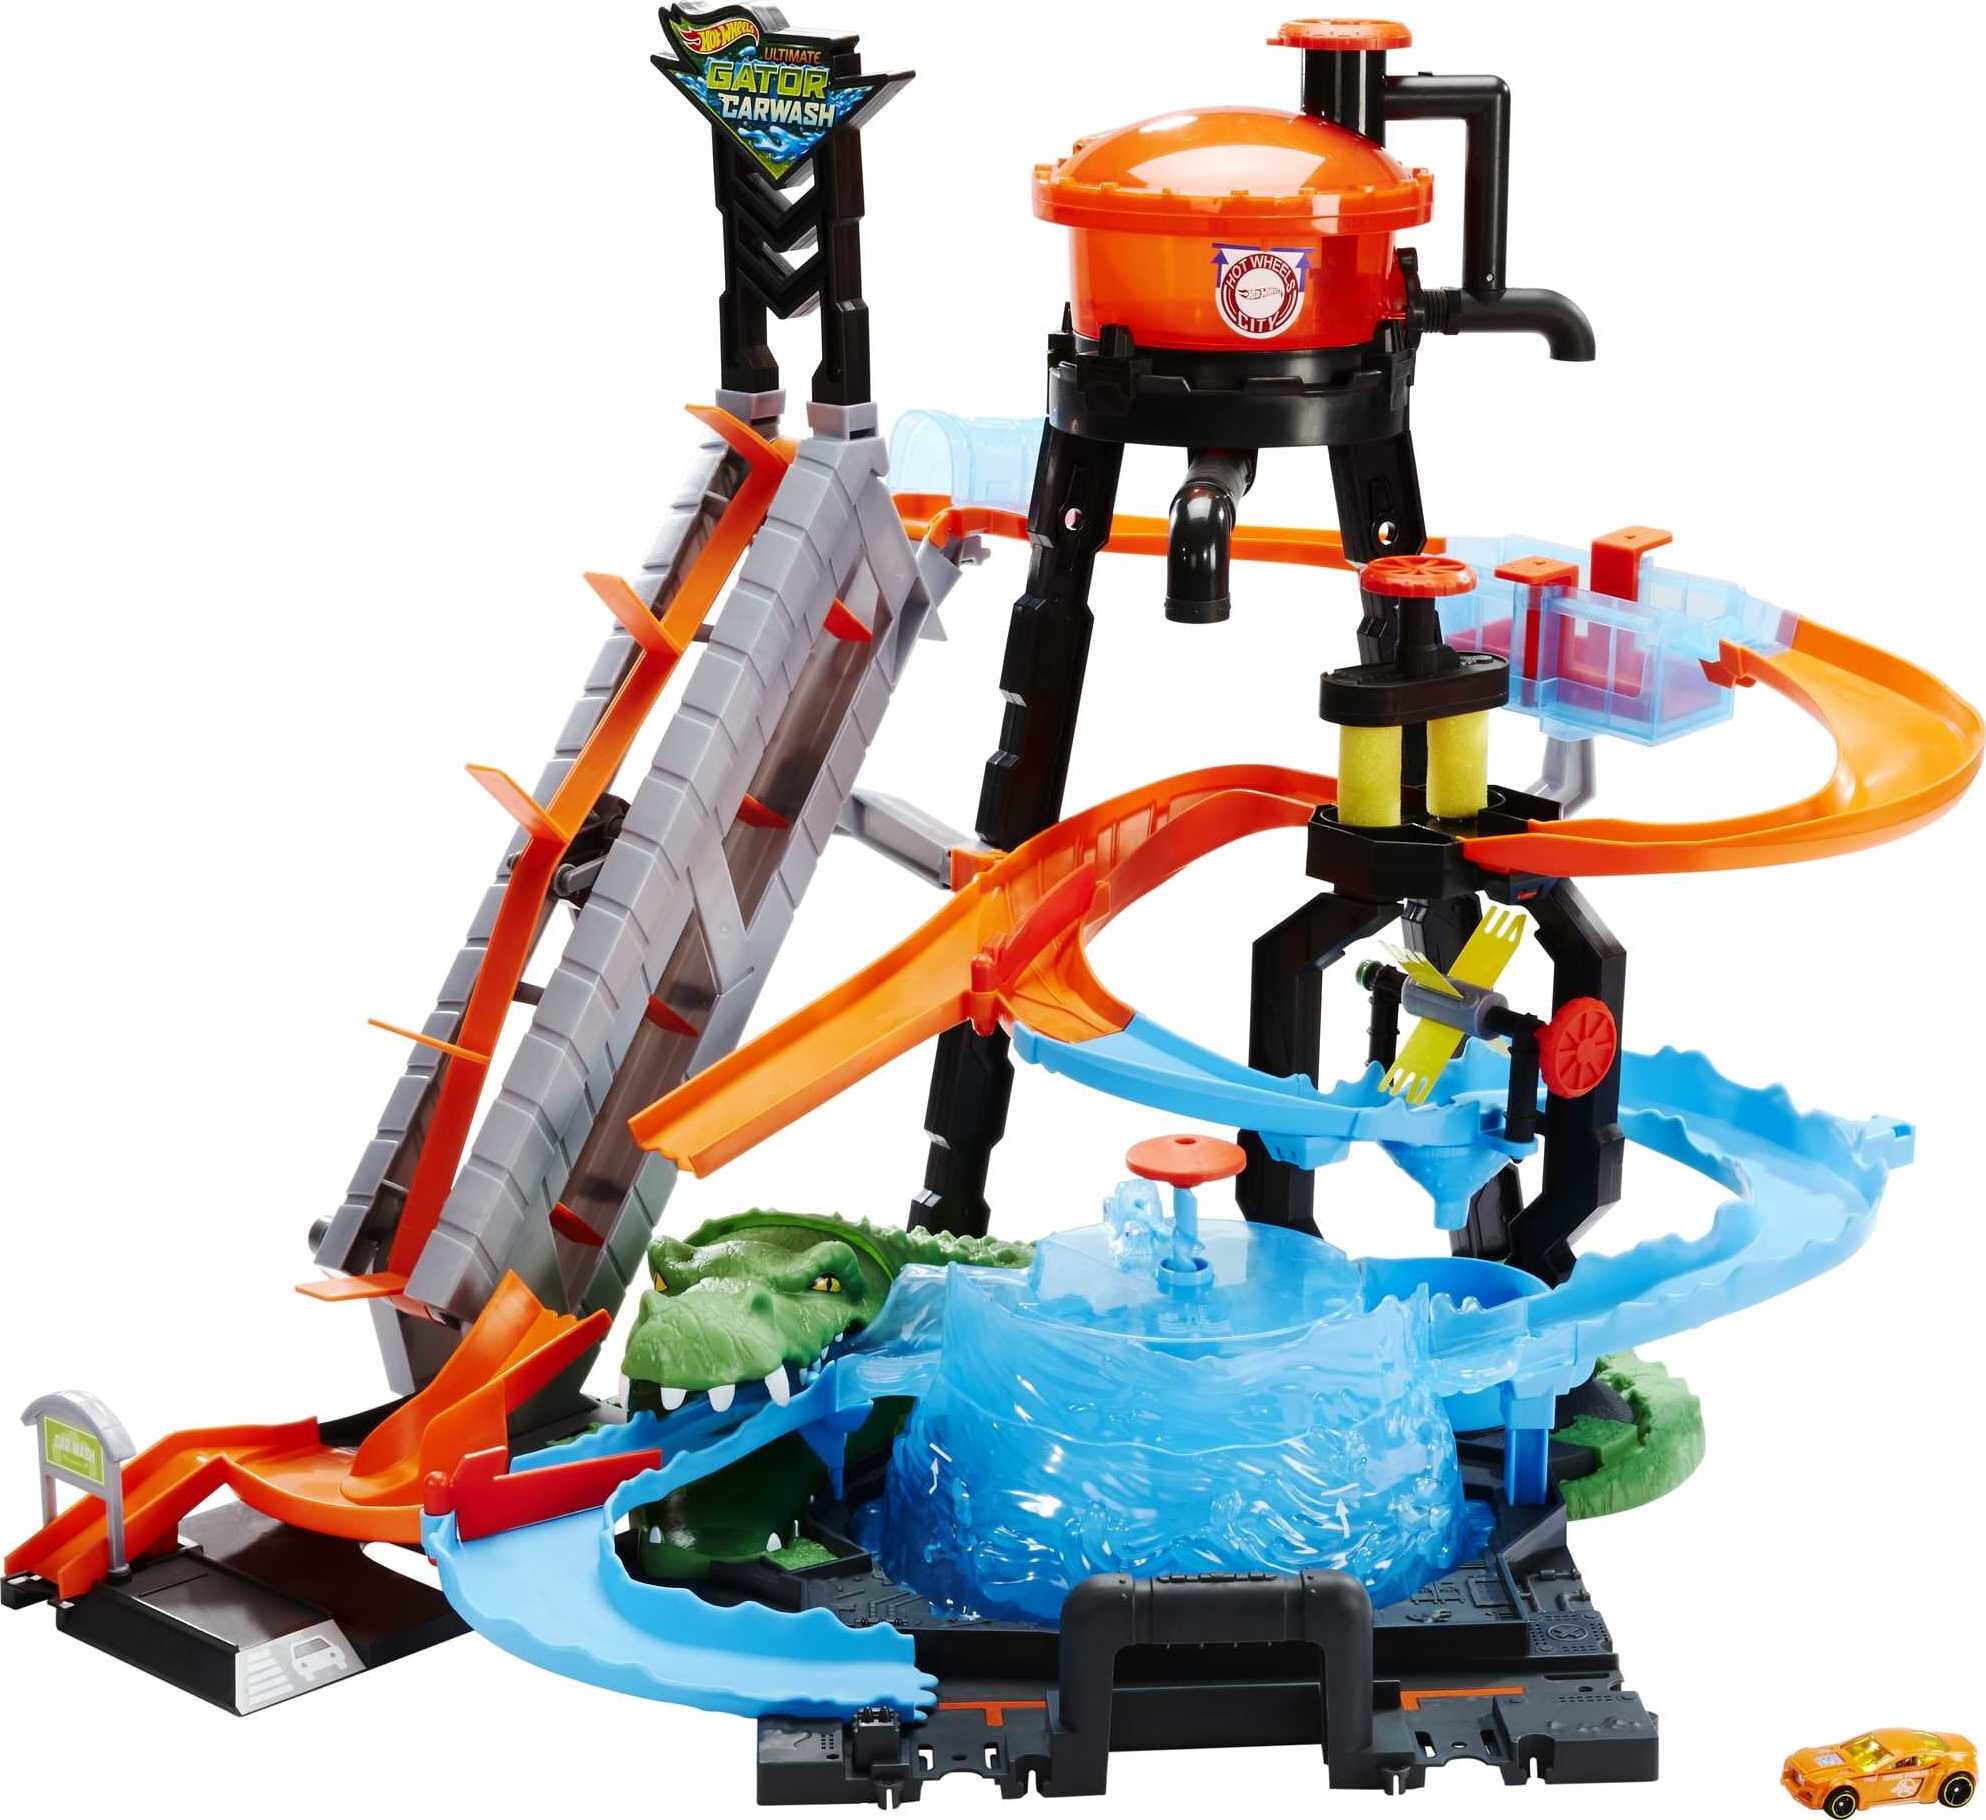 Hot Wheels City Toy Car Track Set Attacking Shark Escape Playset with 1:64  Scale Car, Race to Avoid Chomping Shark